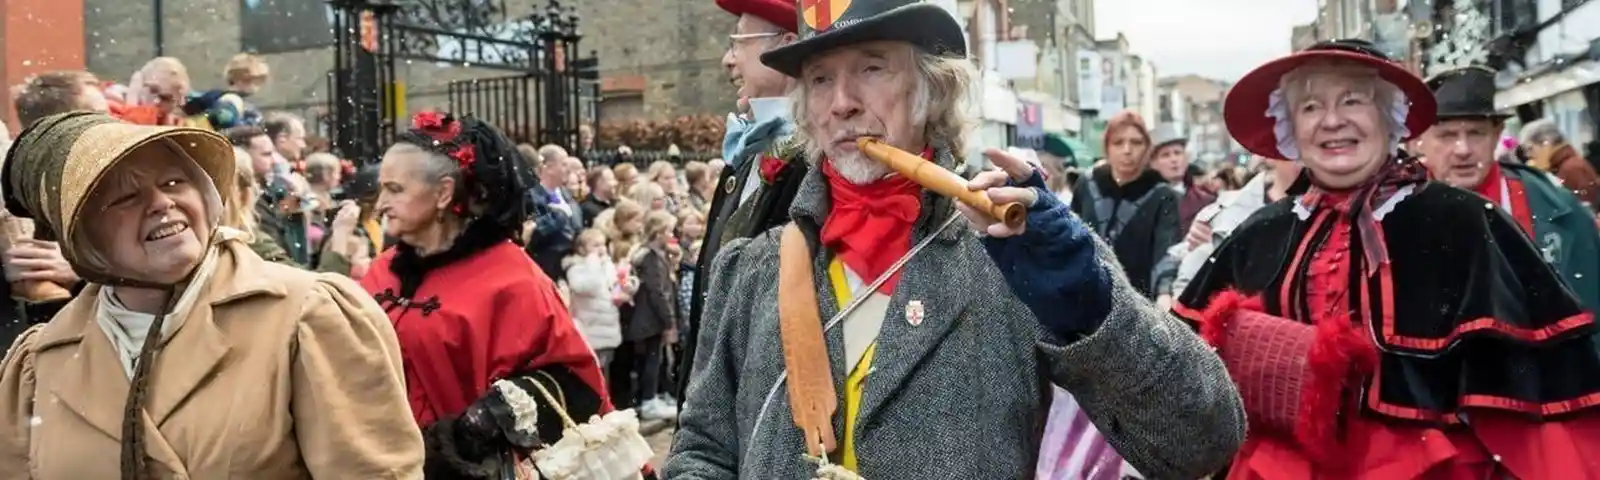 Rochester Uk 2 December 2018 Participants Take Part In The Annual Dickensian Christmas Festival In Rochester The Kent Town Is Given A Victorian Makeover To Celebrate The Life Of The Writer Charles Dick (1